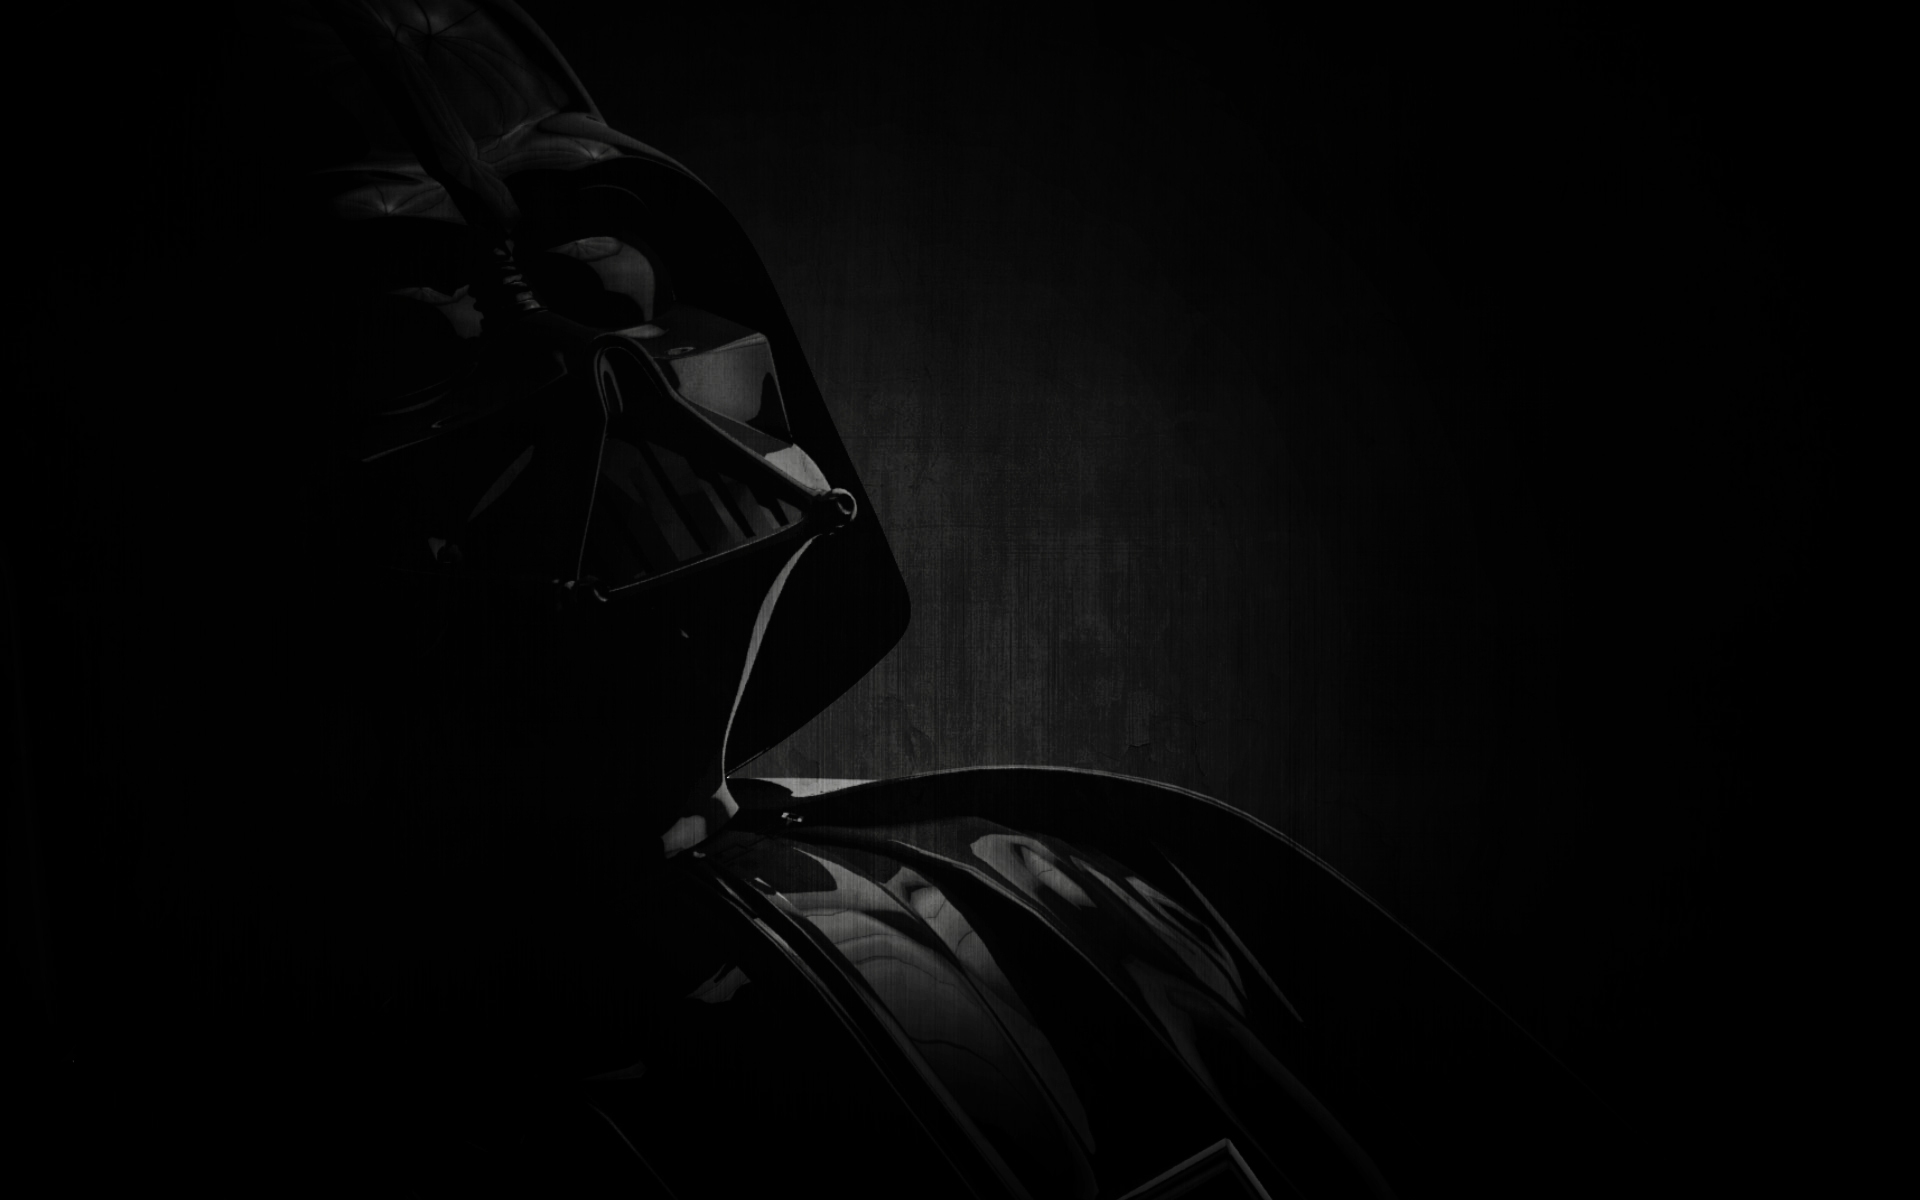 Darth Vader Character, for 1920 x 1200 widescreen resolution